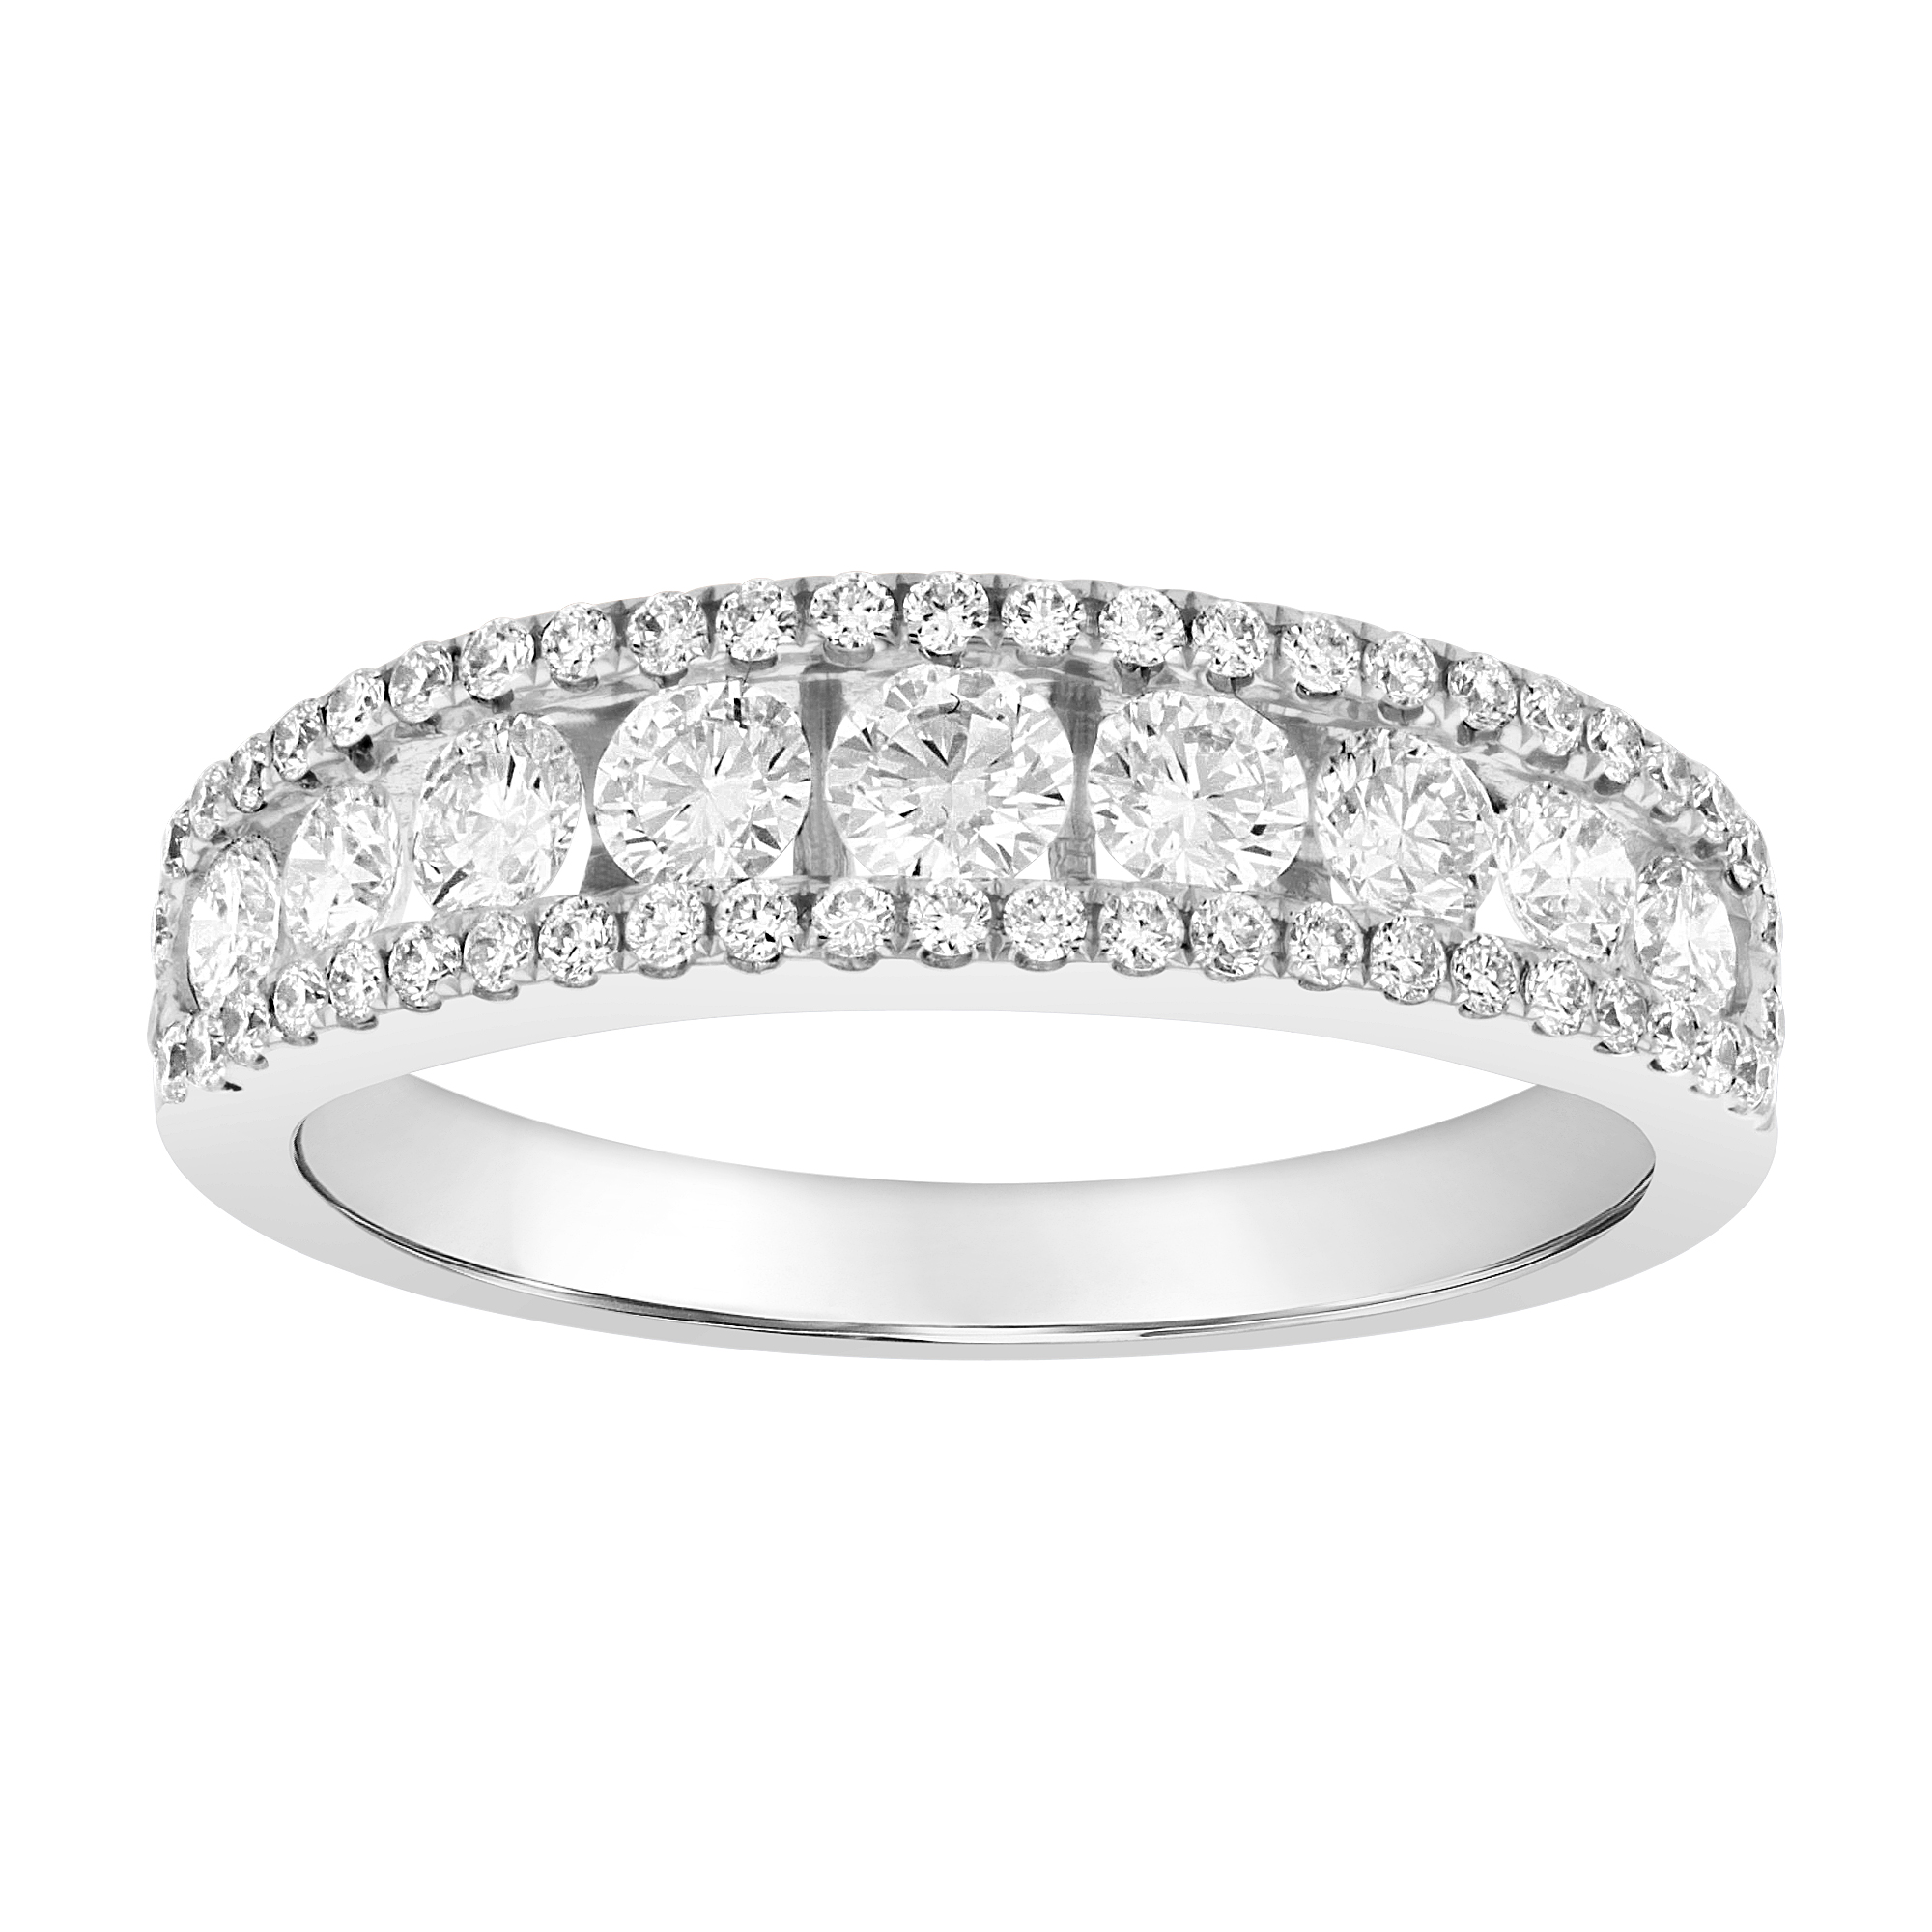 View 0.97ctw Diamond Band in 18k White Gold